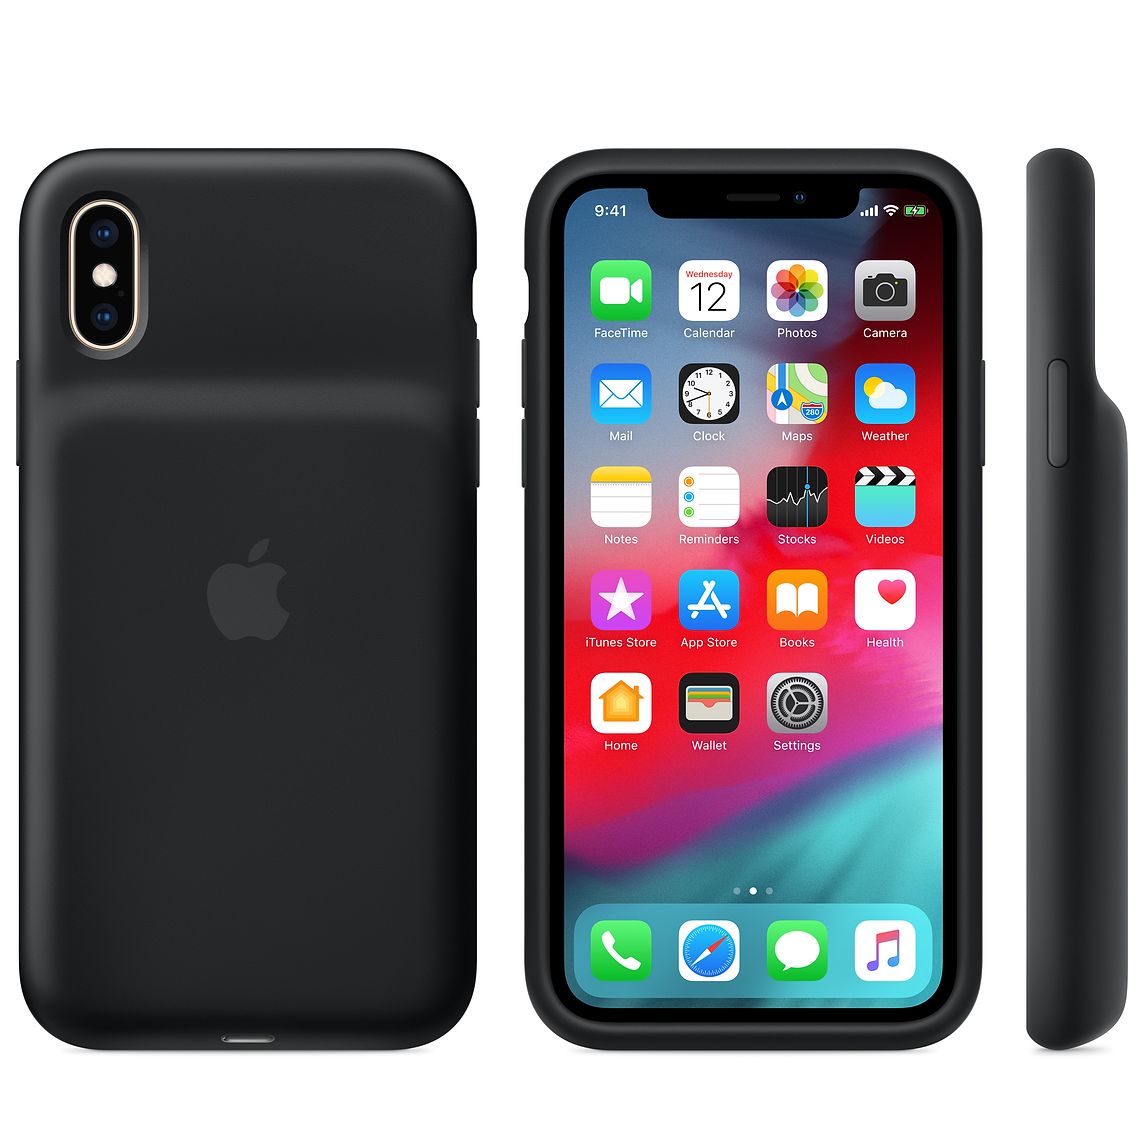 Apple、｢iPhone XS/XS Max｣と｢iPhone XR｣用のバッテリー内蔵ケース｢Smart Battery Case｣を発売